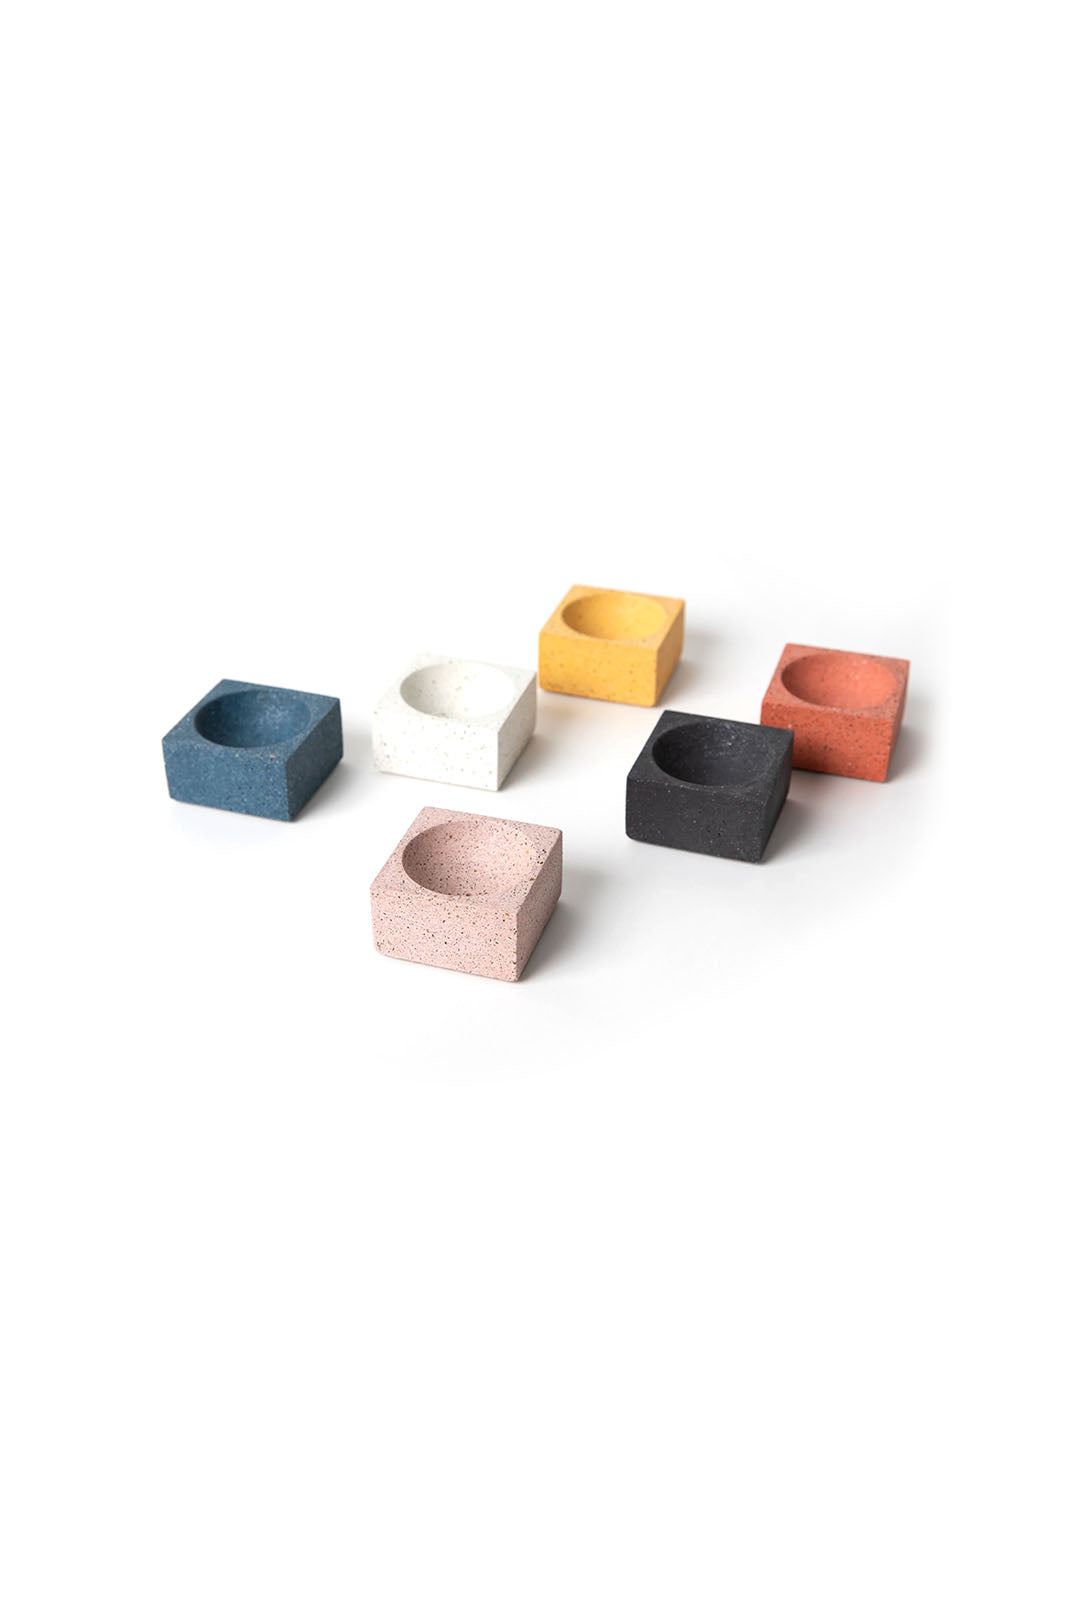 Group of concrete incense holders by Pretti.Cool. Marigold, Coral, Black, Cobalt Blue, and White Terazzo square incense holders for incense sticks or cones. 